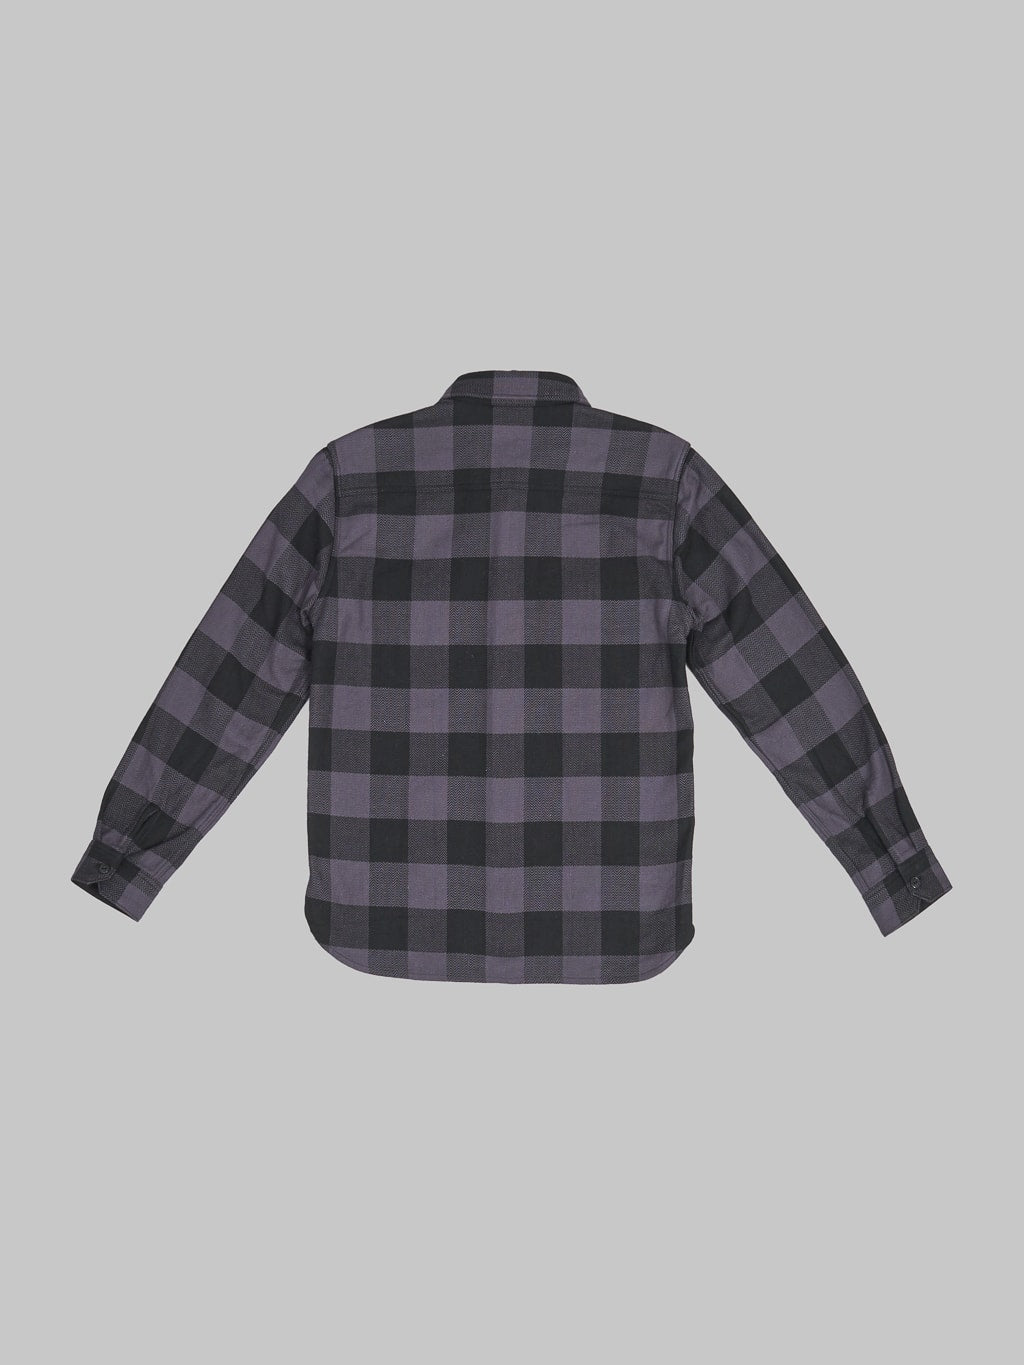 The Flat Head Block Check Flannel Shirt Grey back view